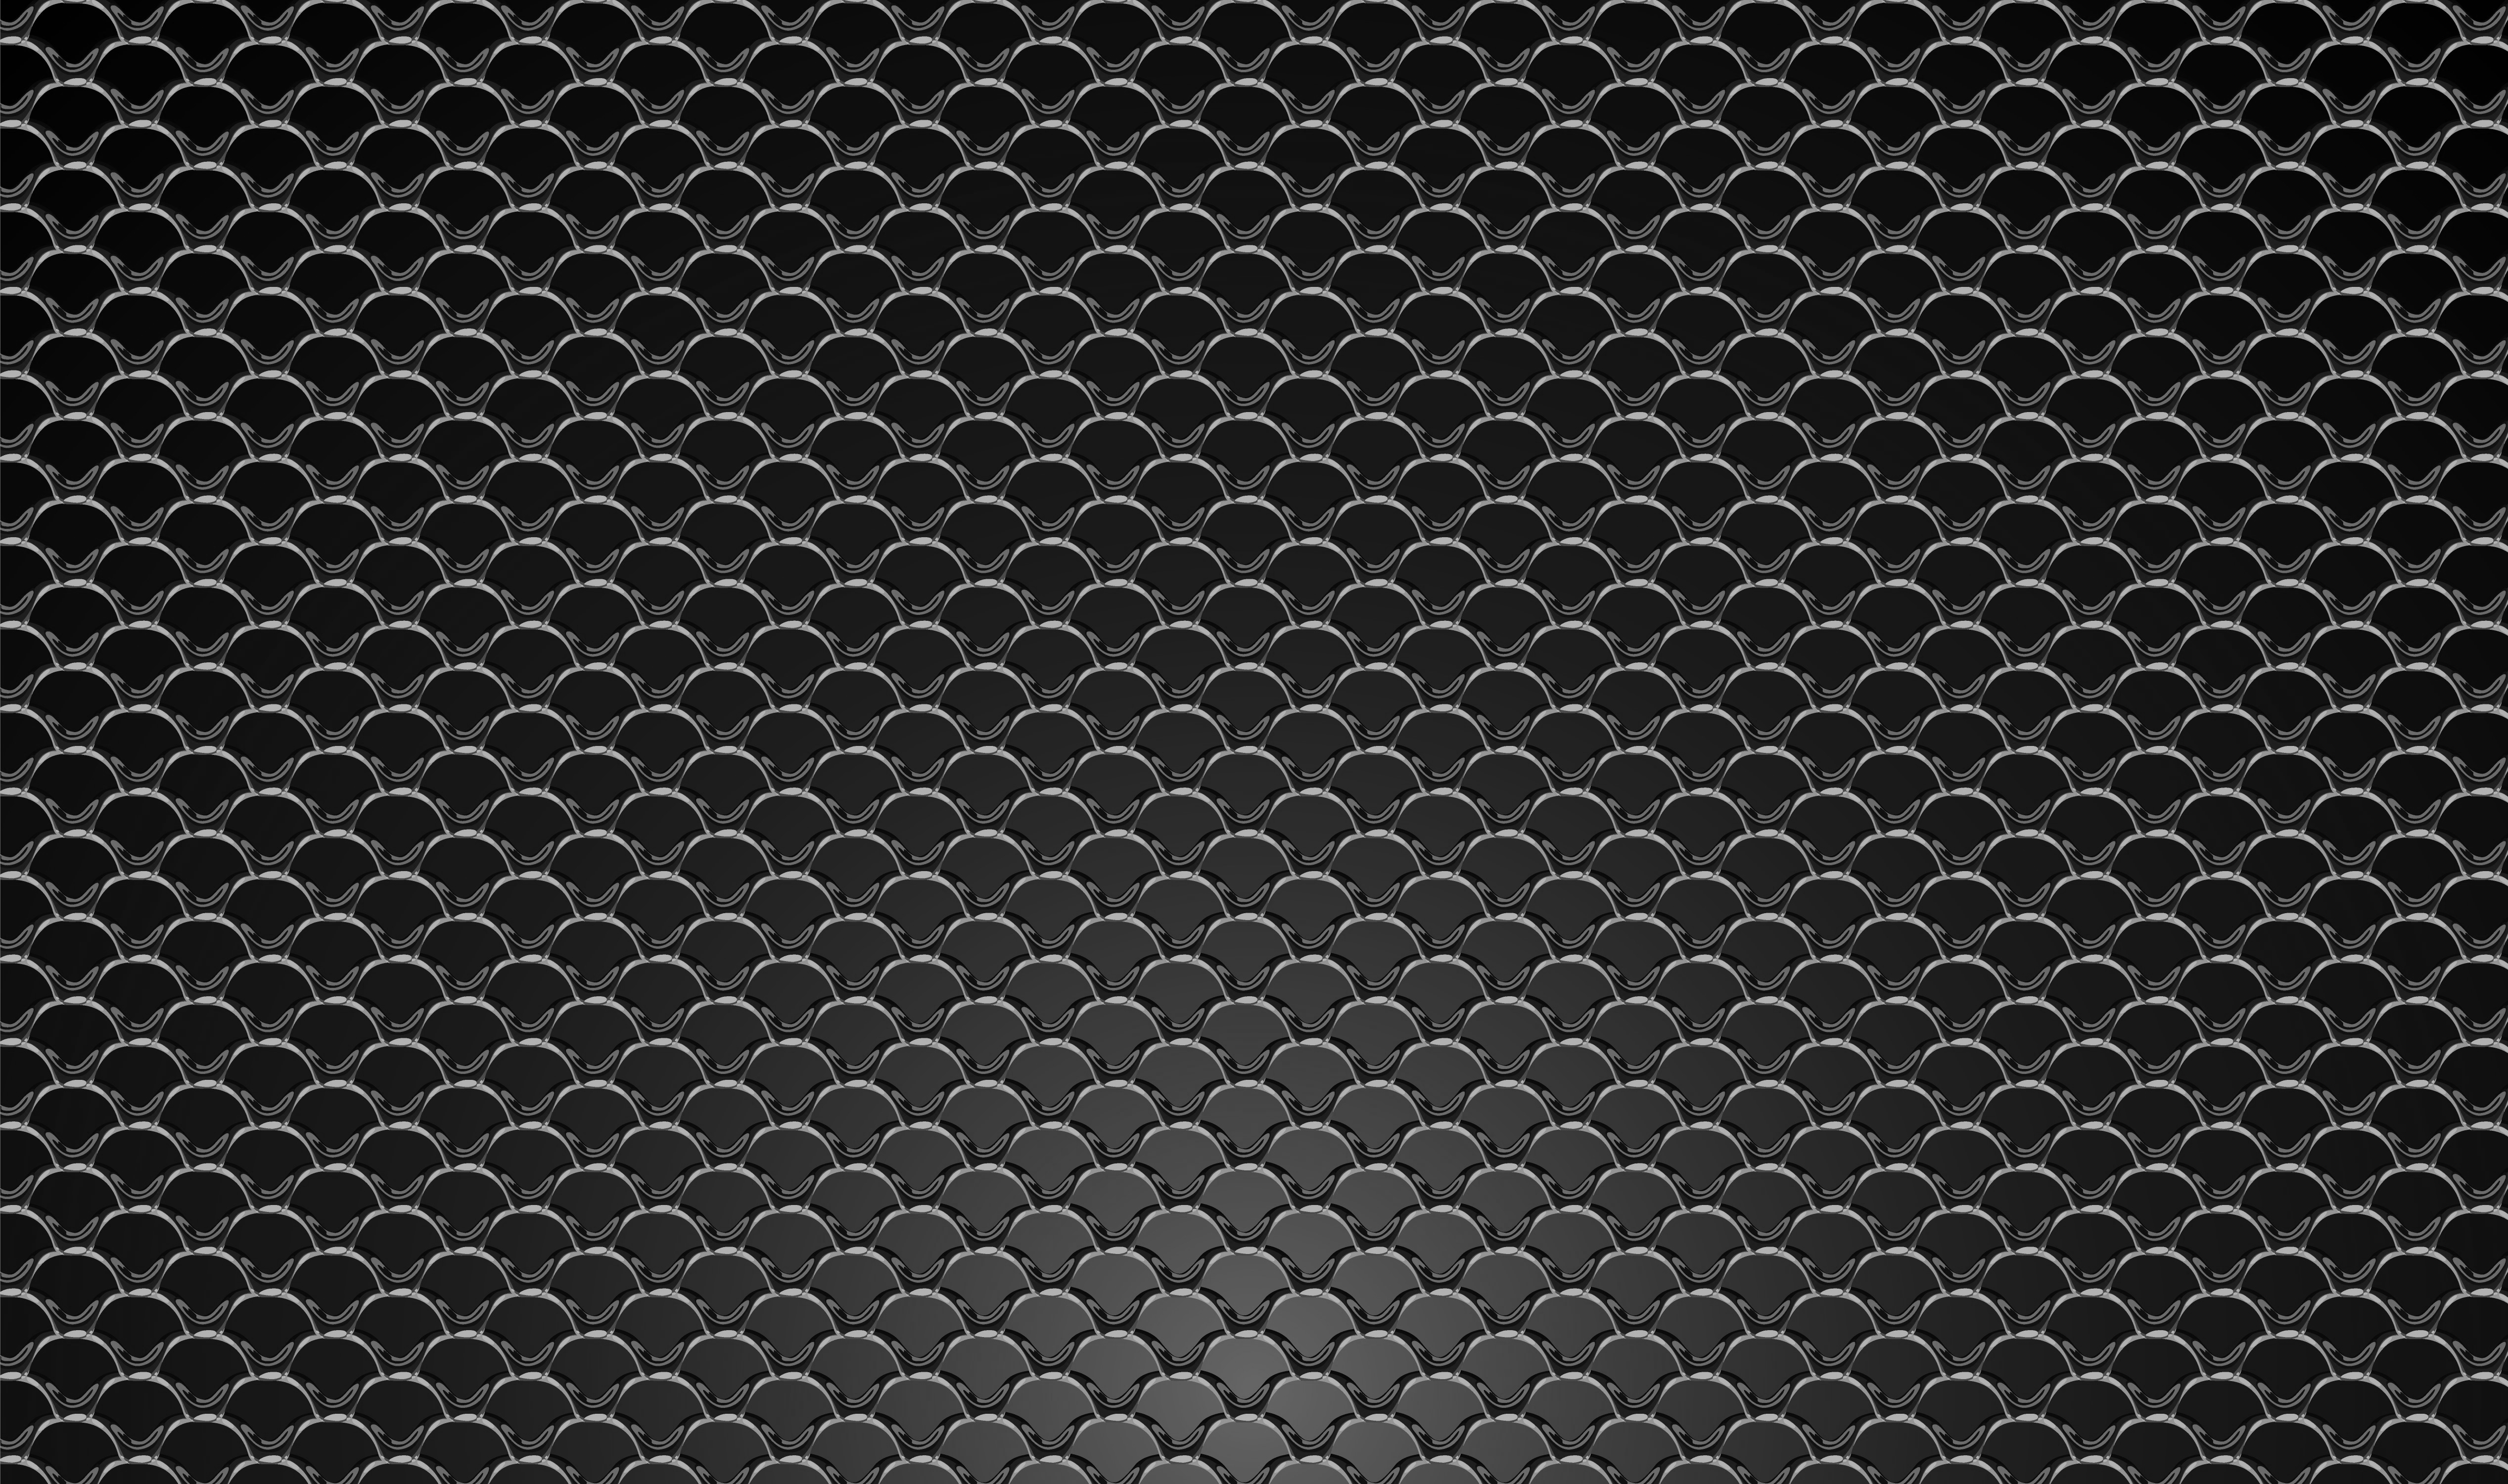 perforated steel